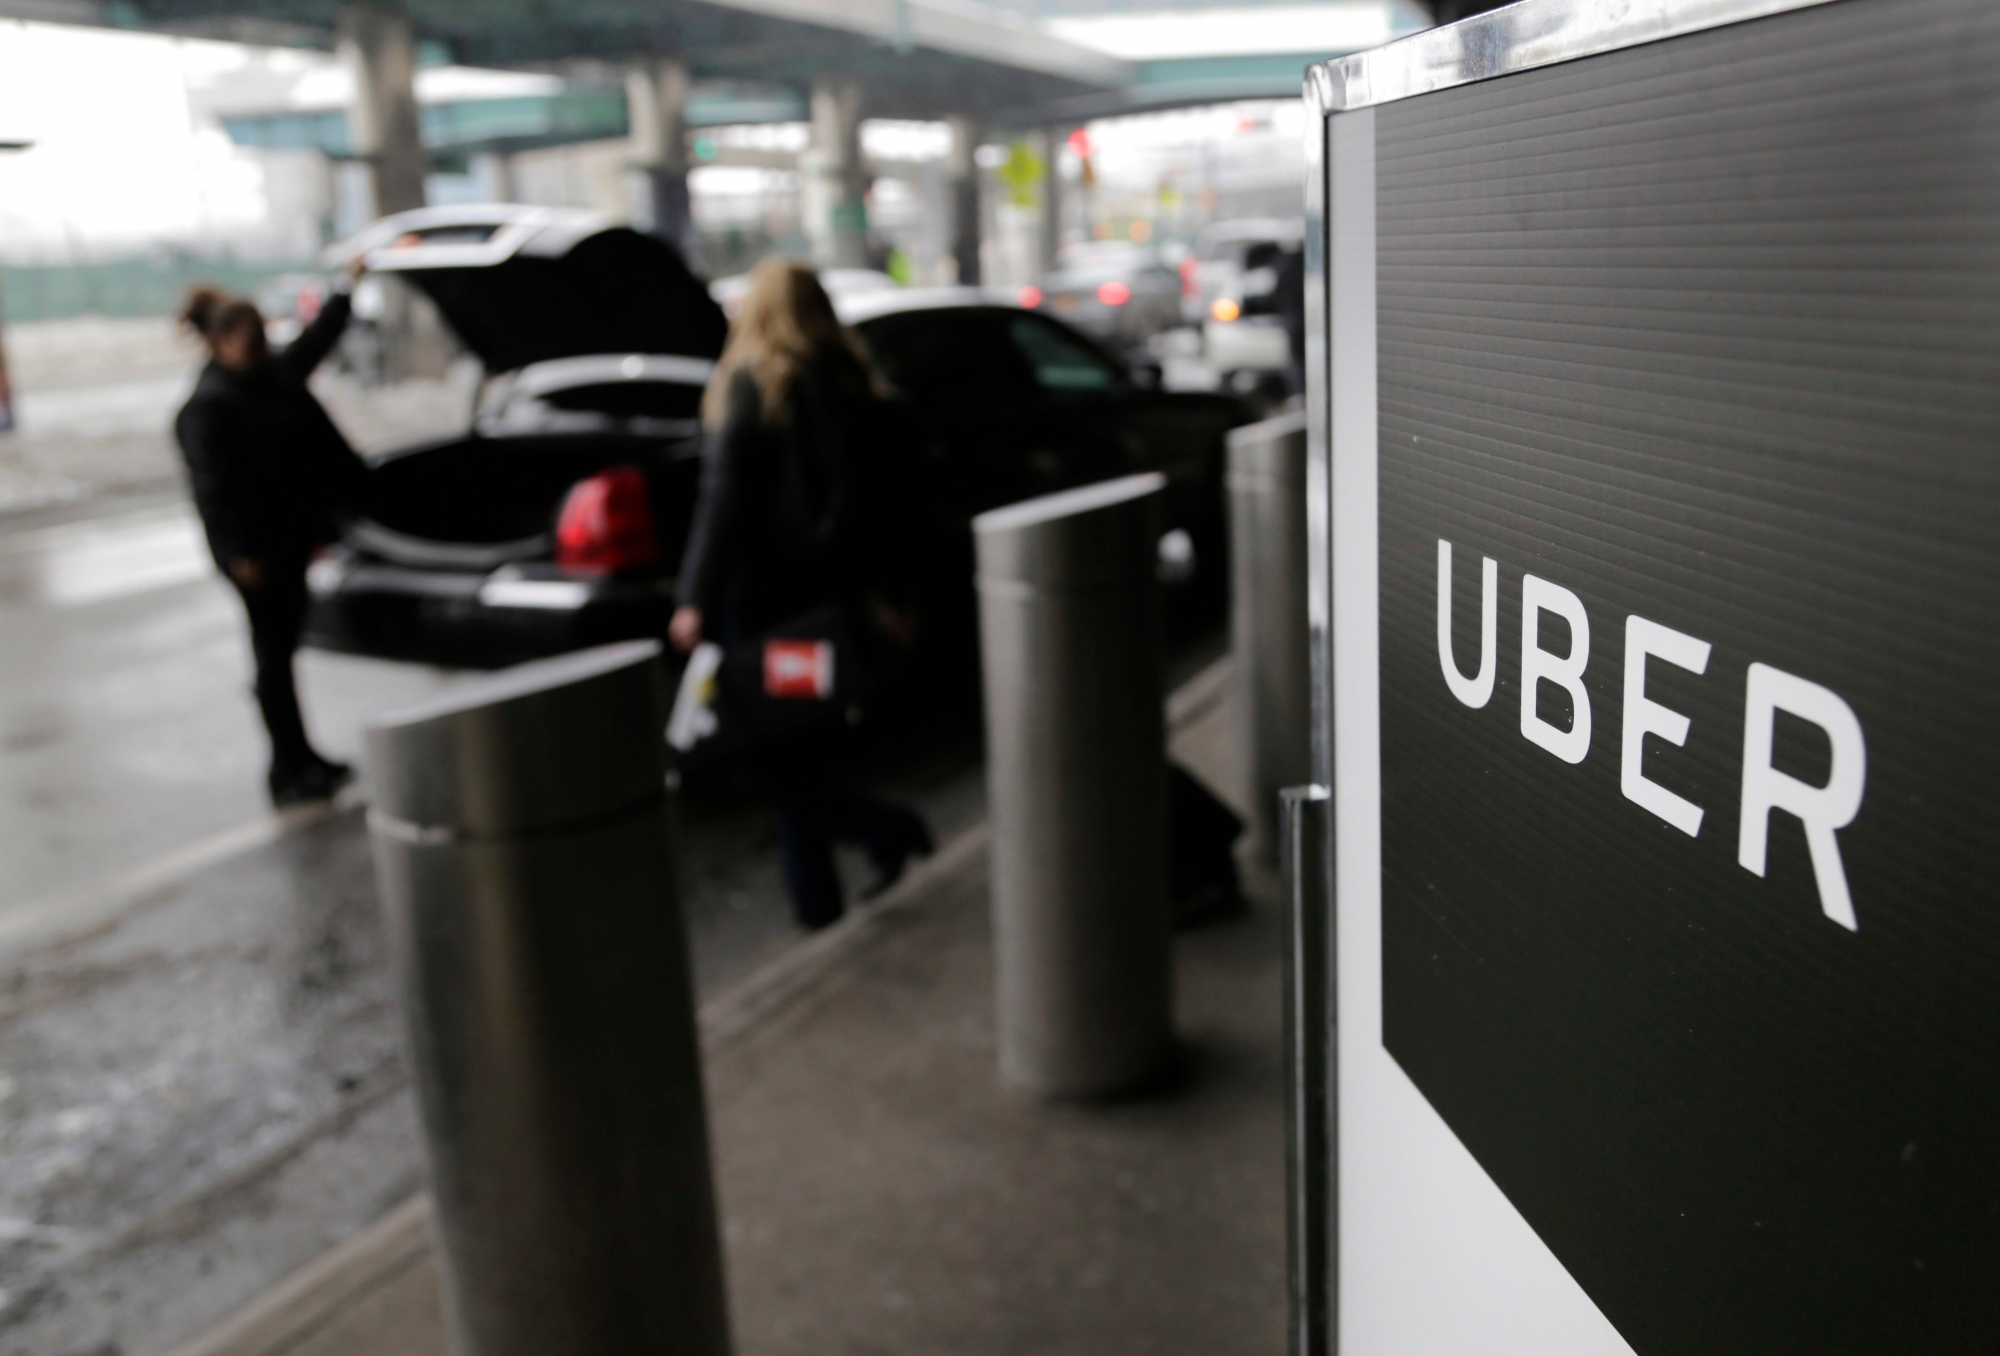 FILE - In this March 15, 2017, file photo, a sign marks a pick-up point for the Uber car service at LaGuardia Airport in New York. Uber is coming clean about its cover-up of a year-old hacking attack that stole personal information about more than 57 million of the beleaguered ride-hailing service's customers and drivers. The revelation Tuesday marks the latest stain on Uber's reputation. (AP Photo/Seth Wenig, File) Uber-Data Breach